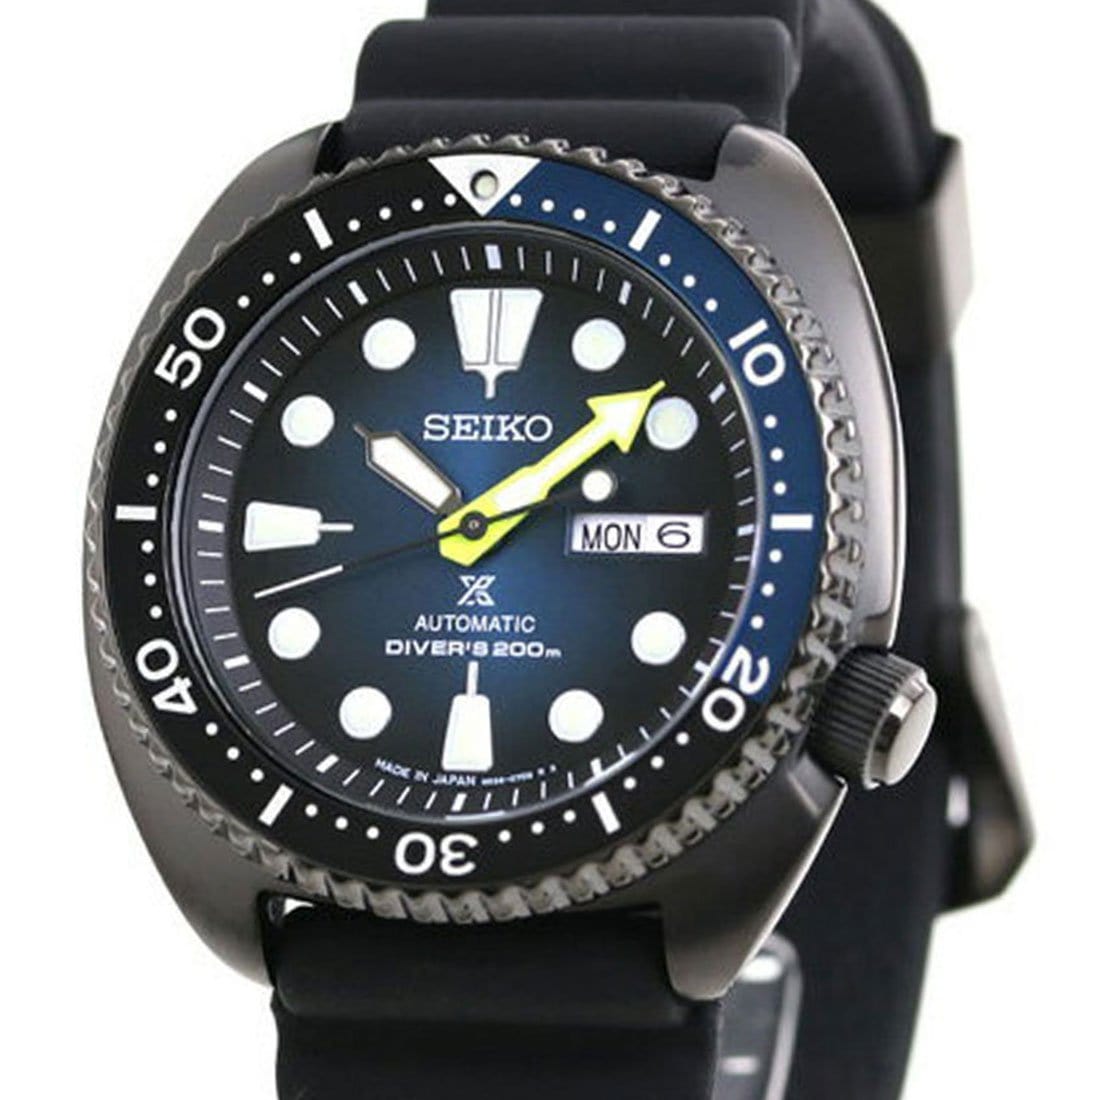 Seiko Prospex Automatic Black Diving Watch SBDY041